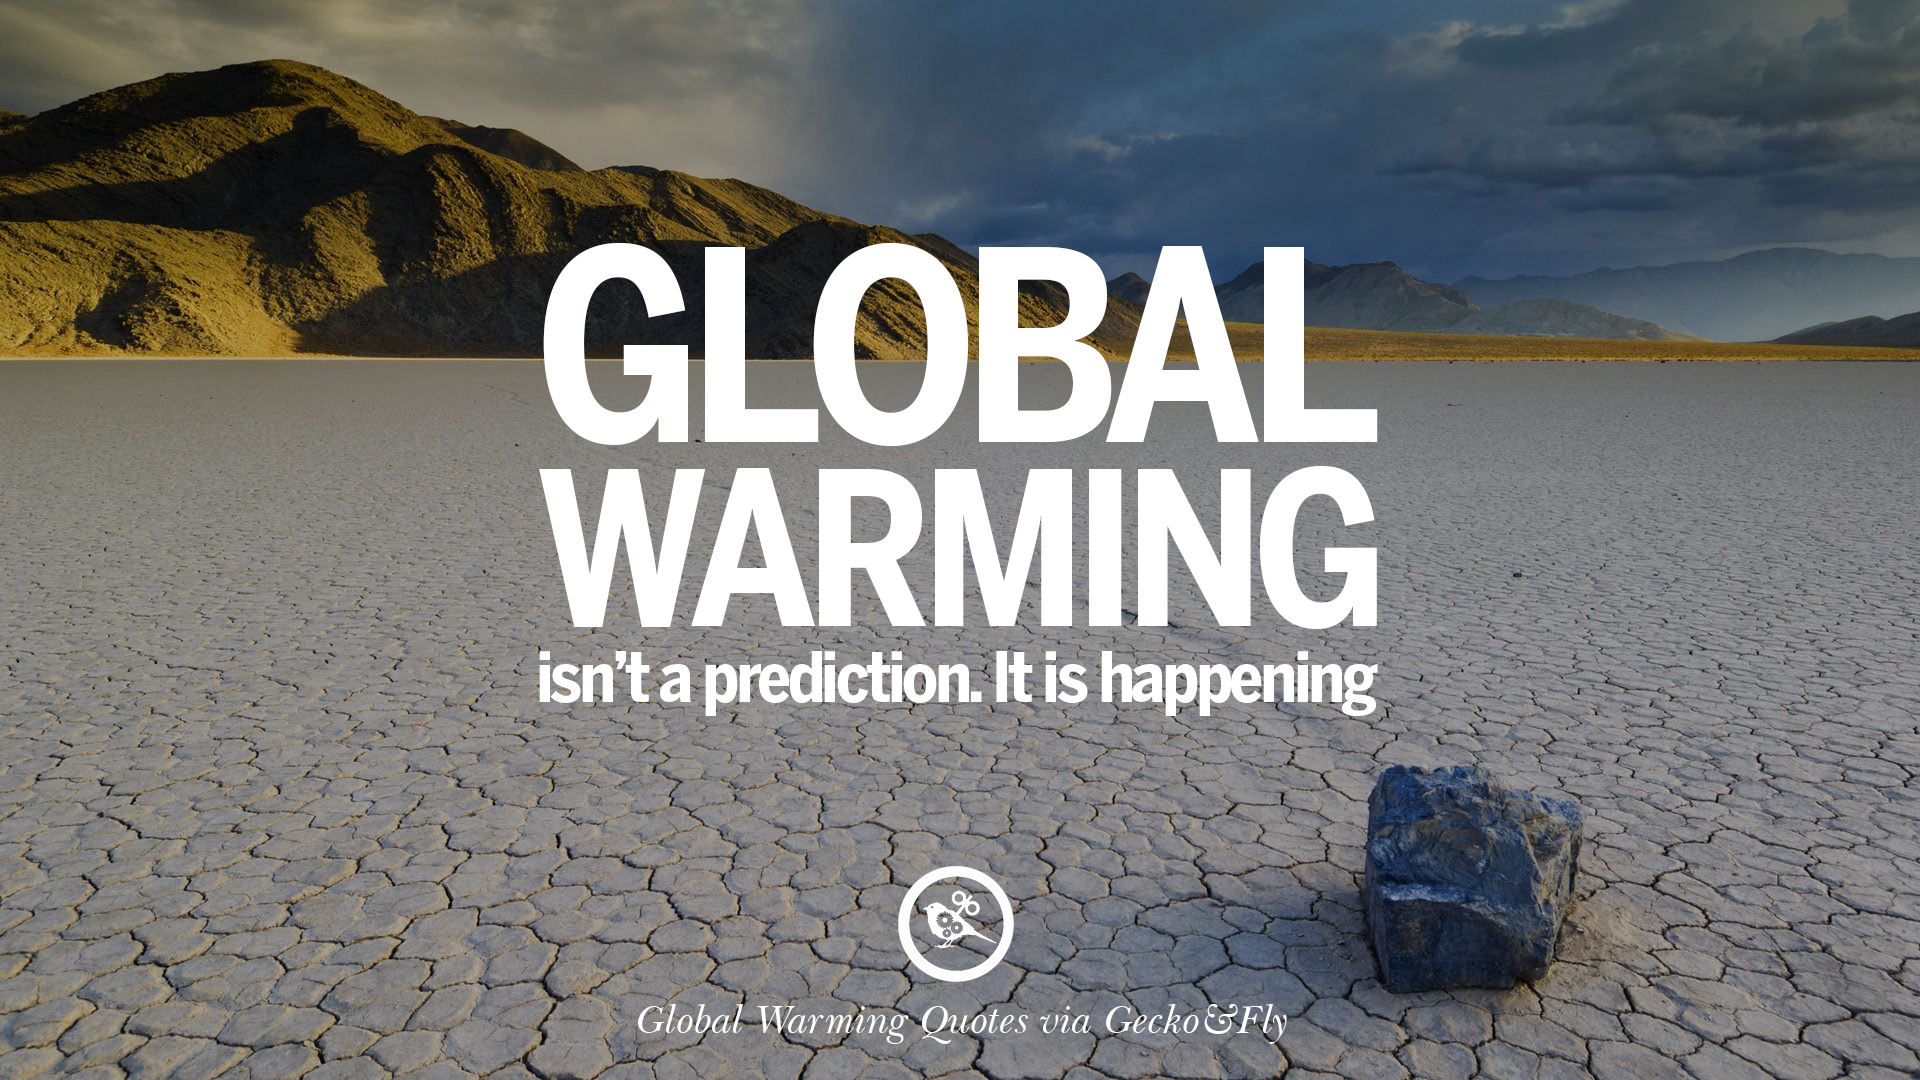 20 Global Warming Quotes About Carbon Dioxide, Greenhouse Gases, And